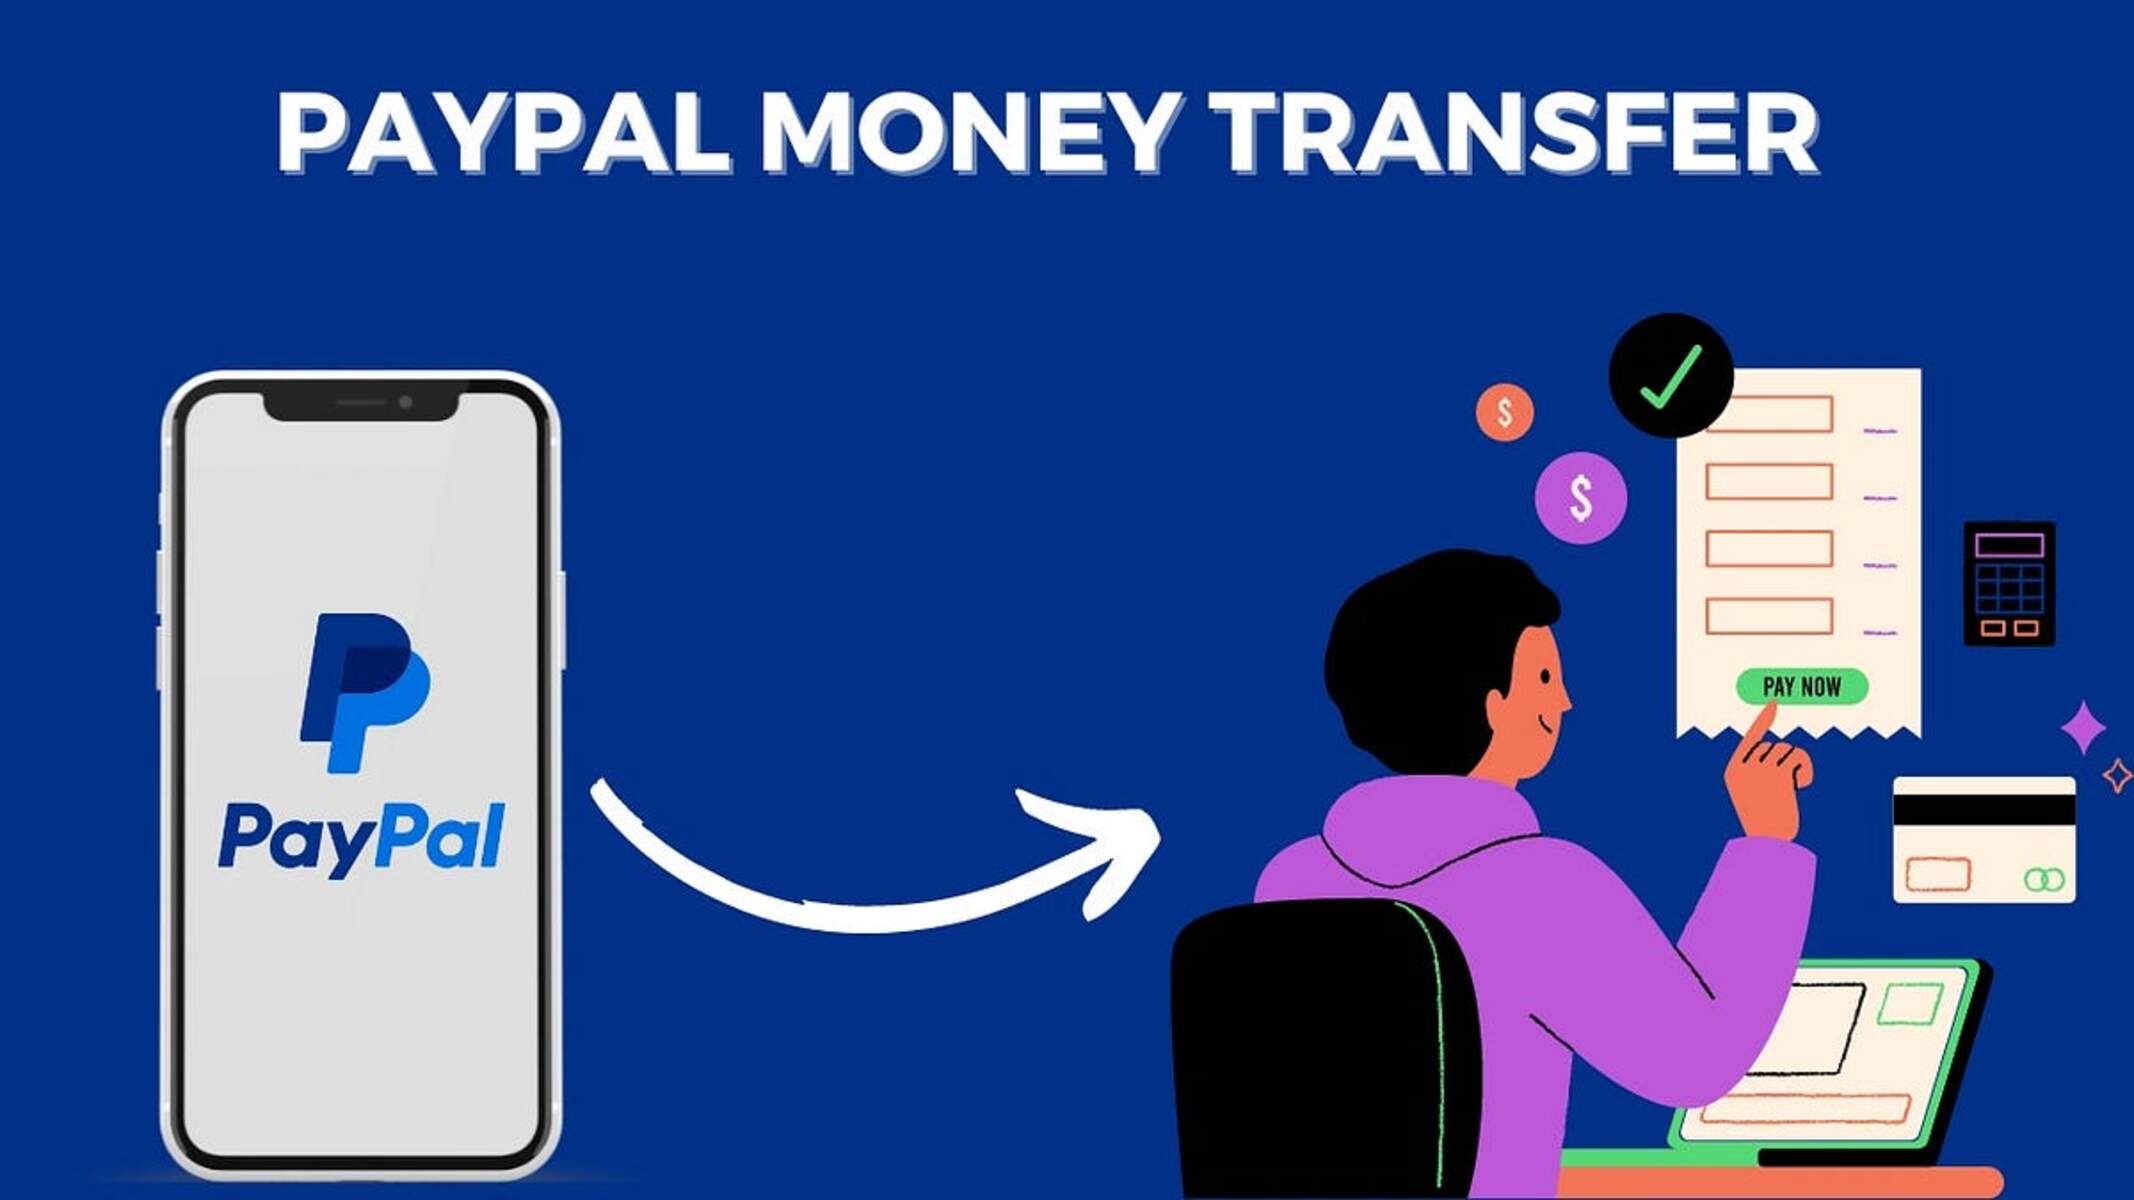 How Long Does Paypal Money Transfer Take